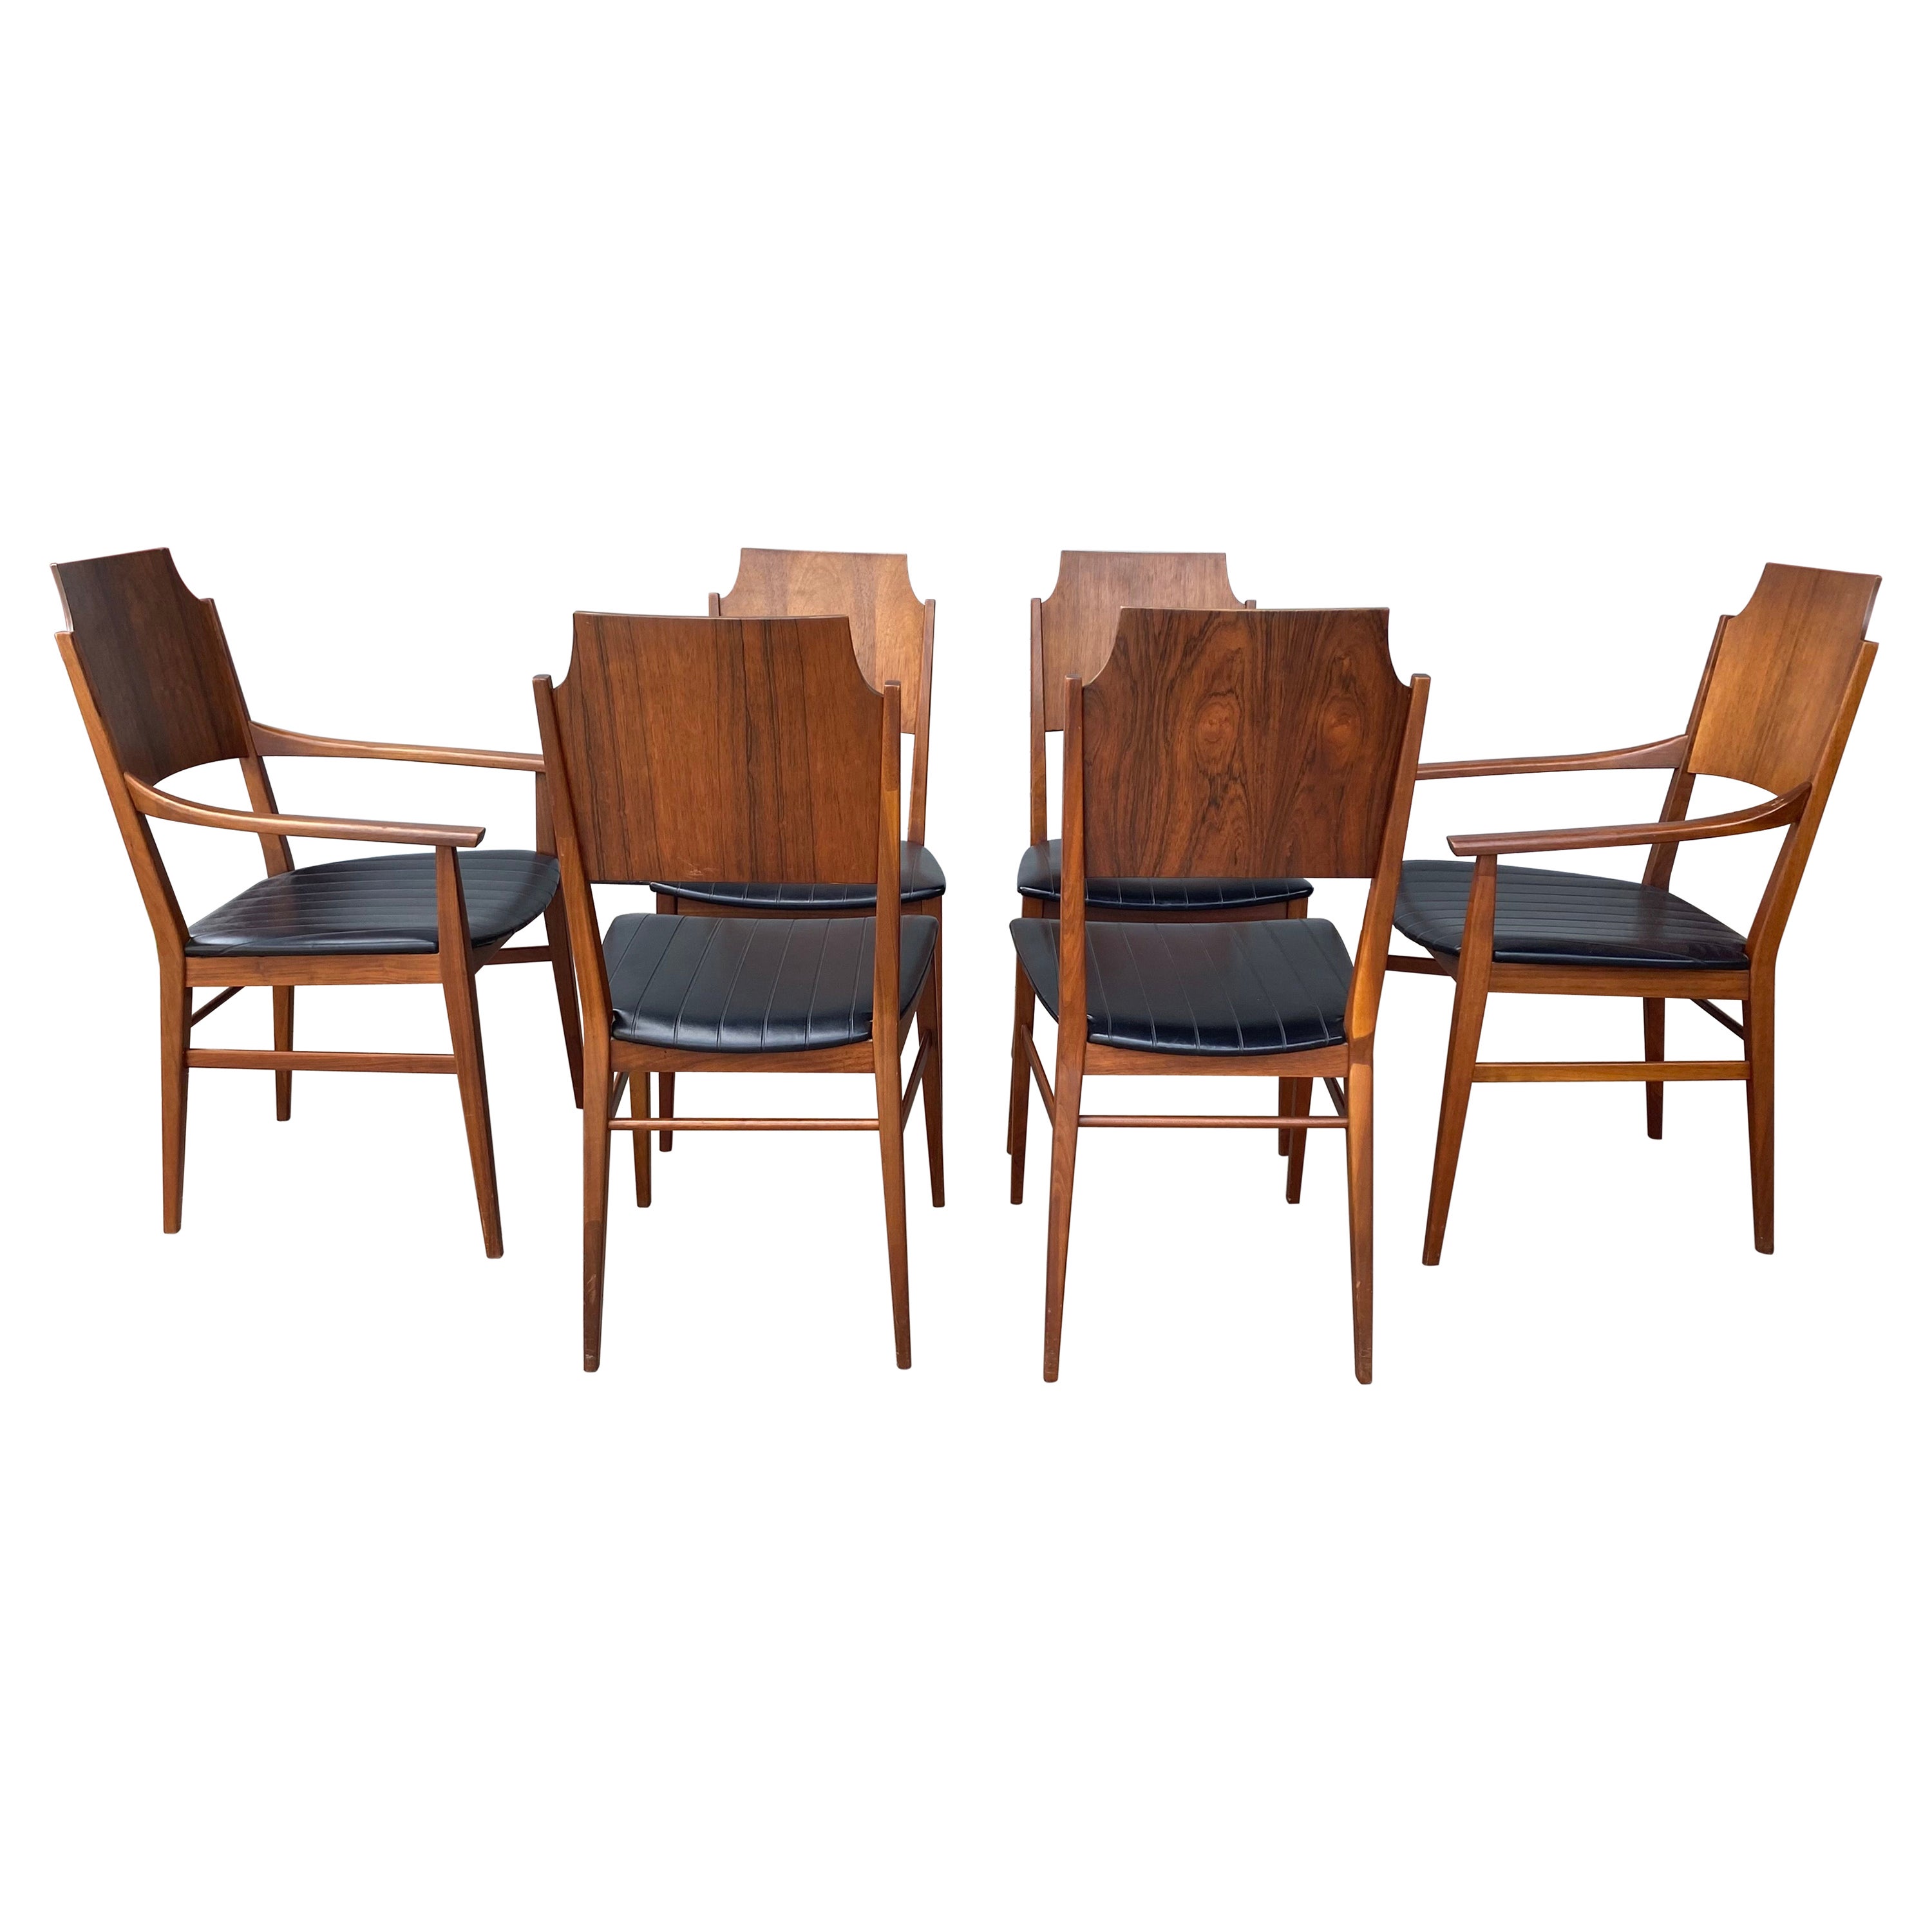 Set 6 Rosewood Dining Chairs, Paul McCobb, Delineator For Sale